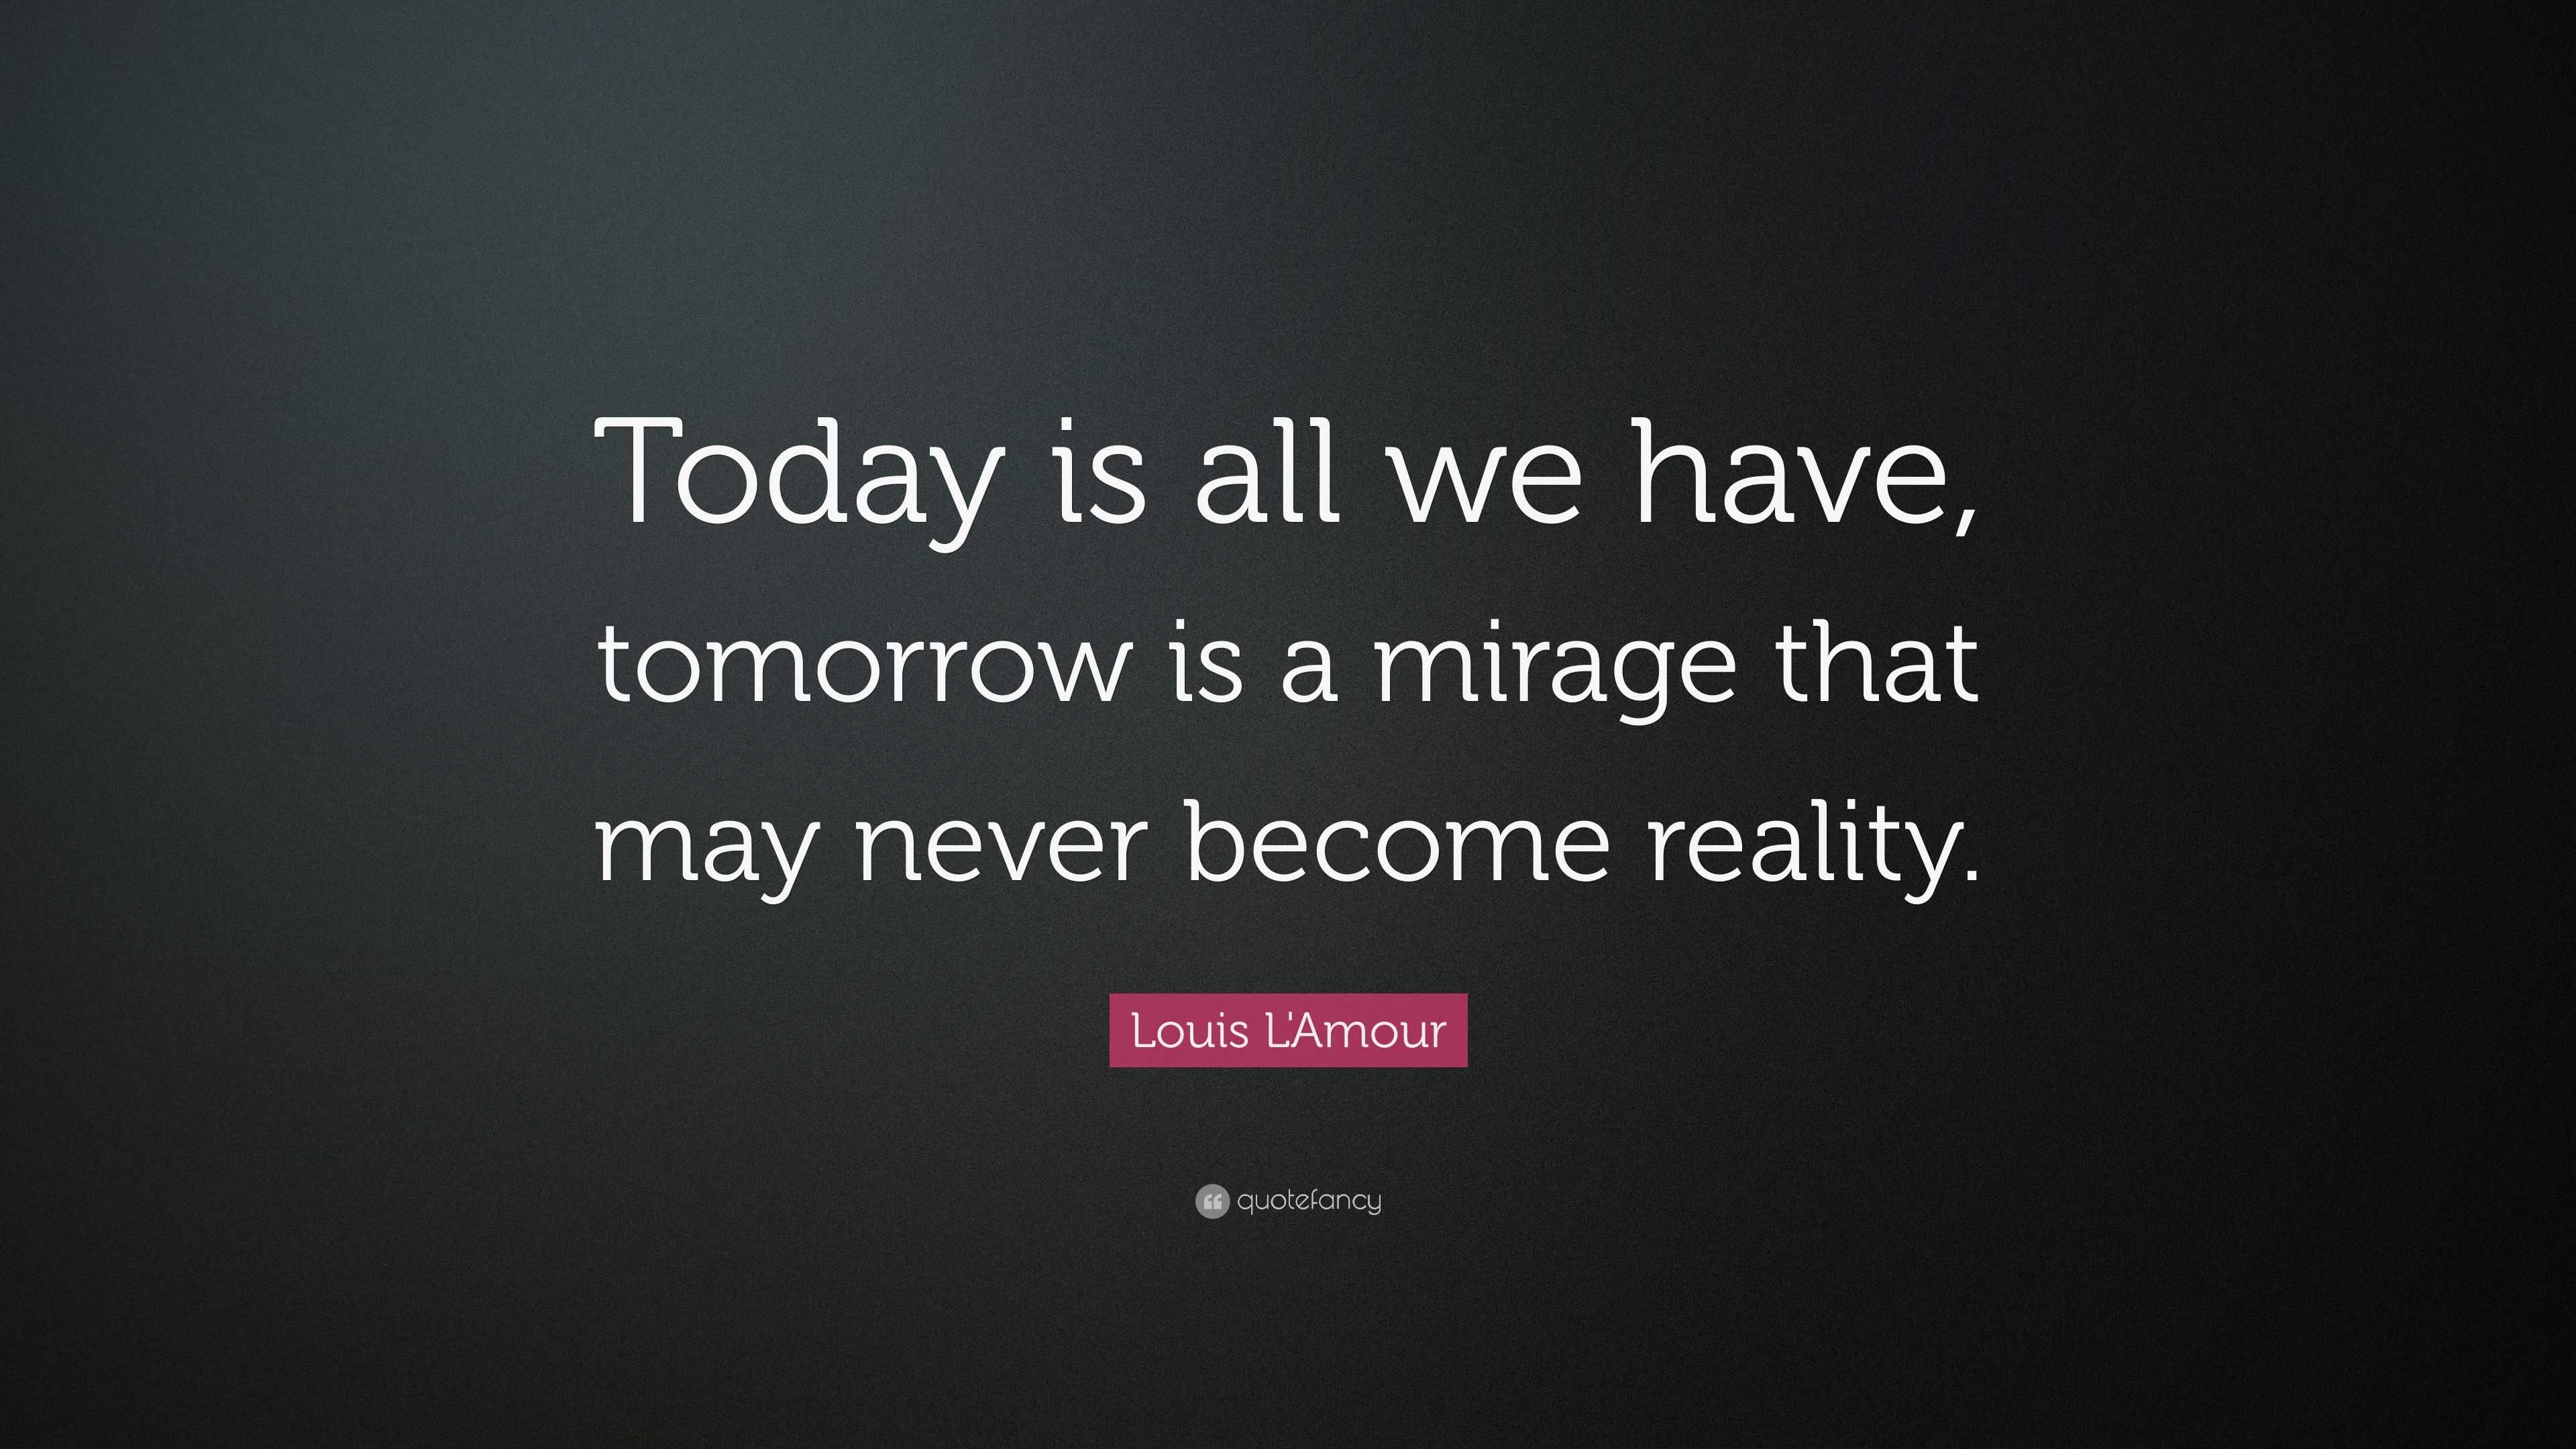 Louis L'Amour Quote: “Today is all we have, tomorrow is a mirage that ...